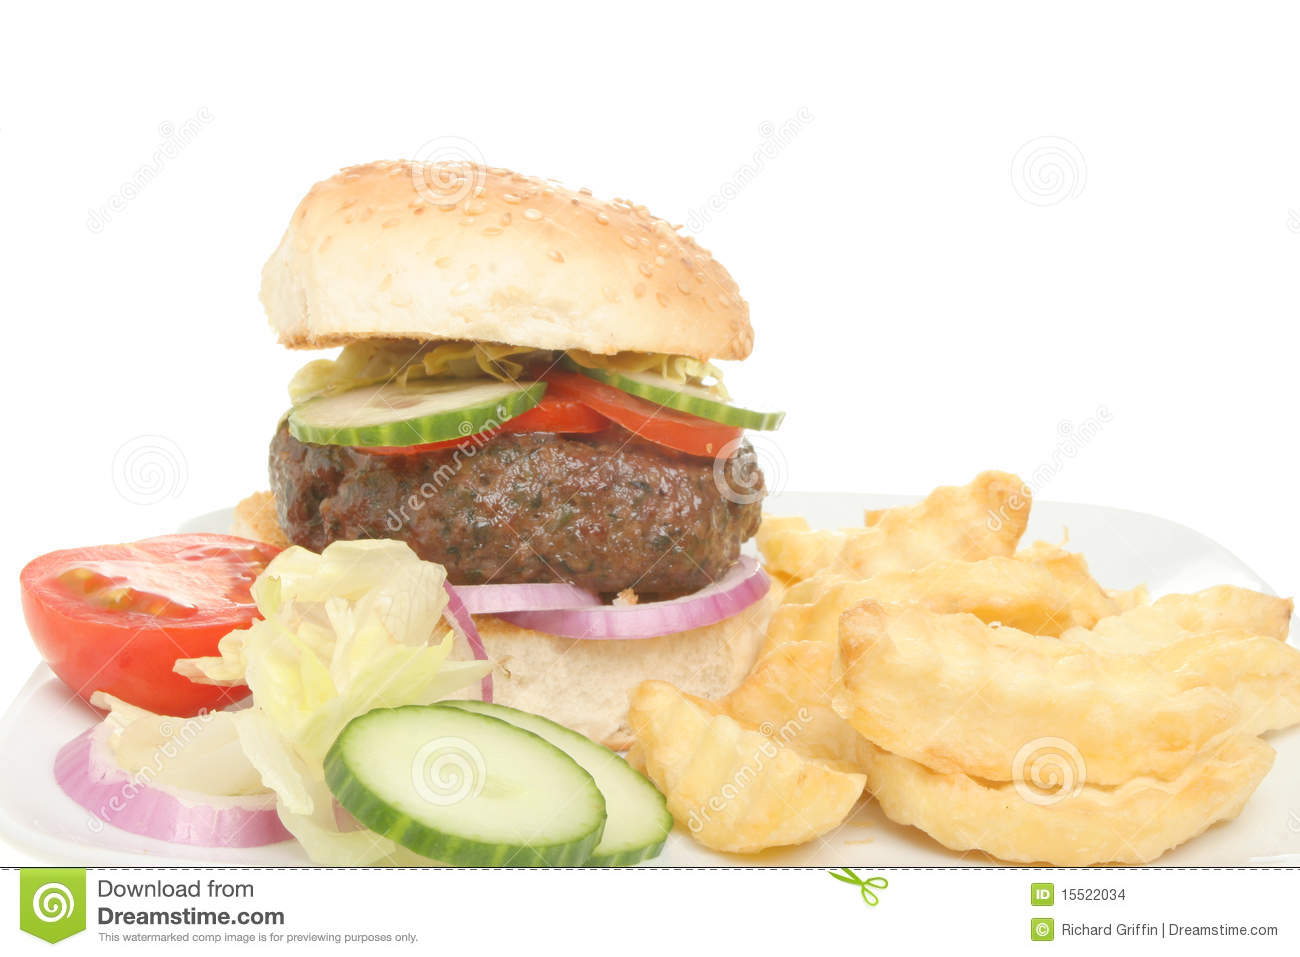 Burger And Chips Closeup Stock Images   Image  15522034